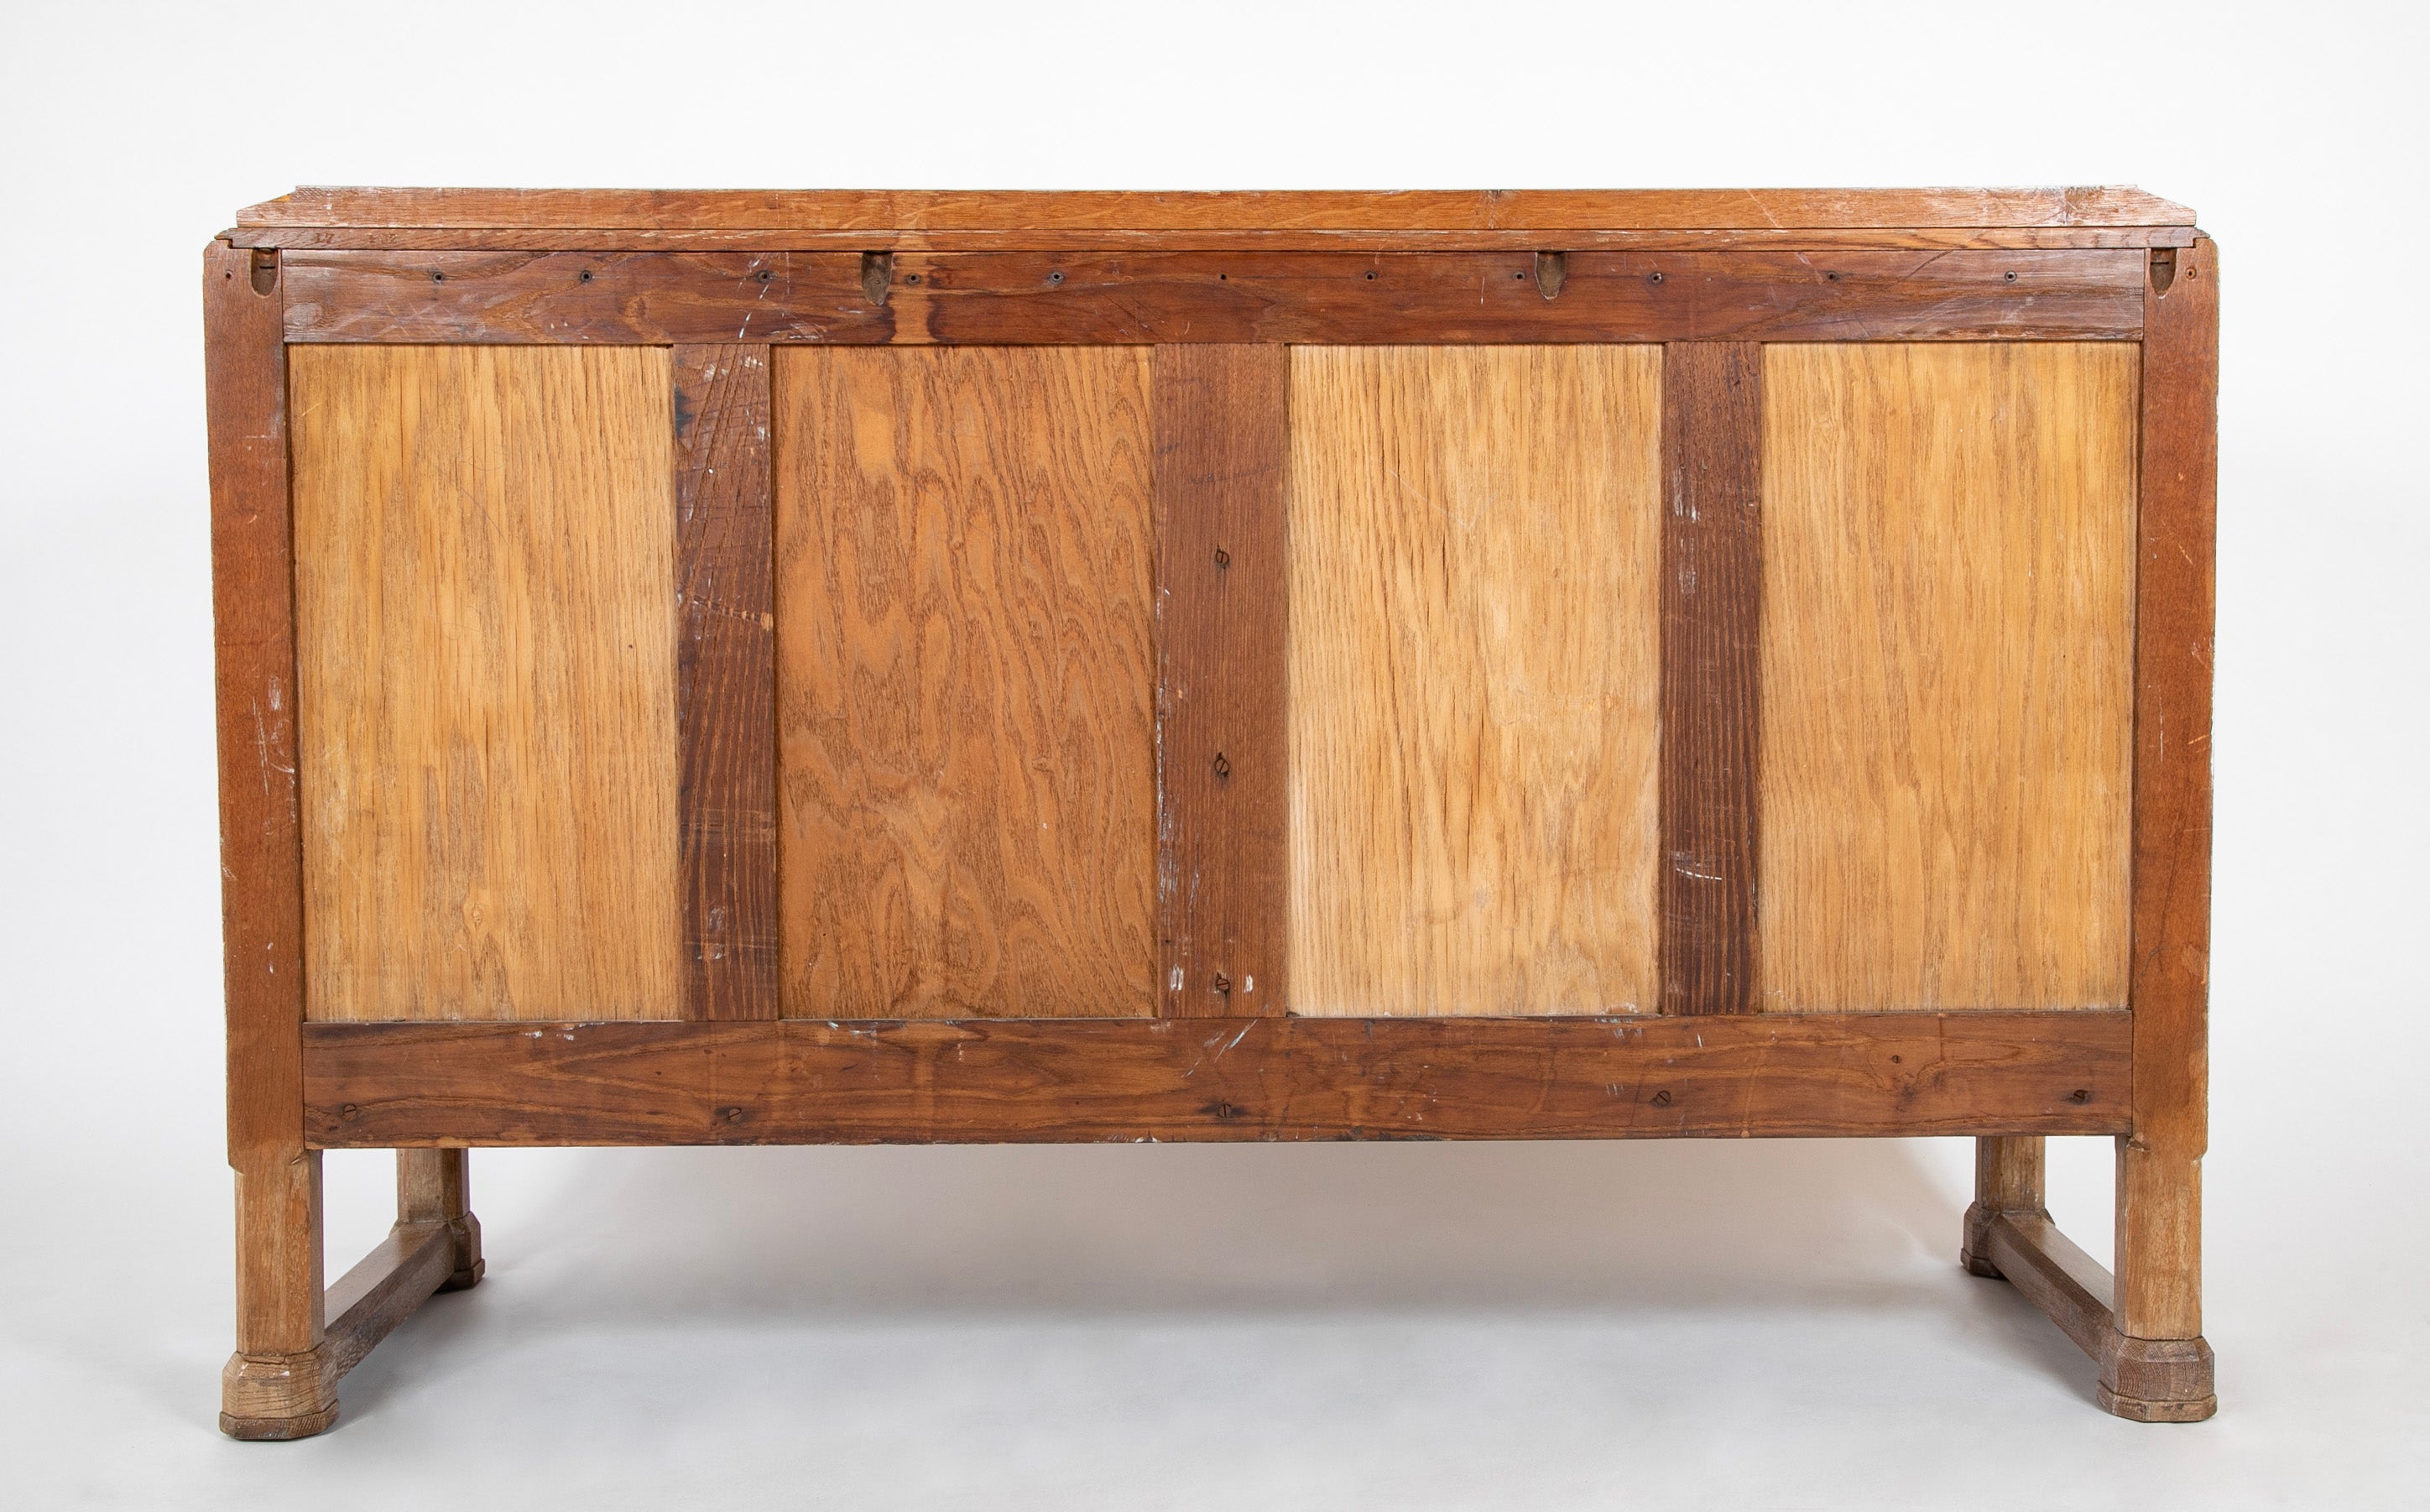 Limed Oak Cabinet Attributed to Ambrose Heal & Son, London